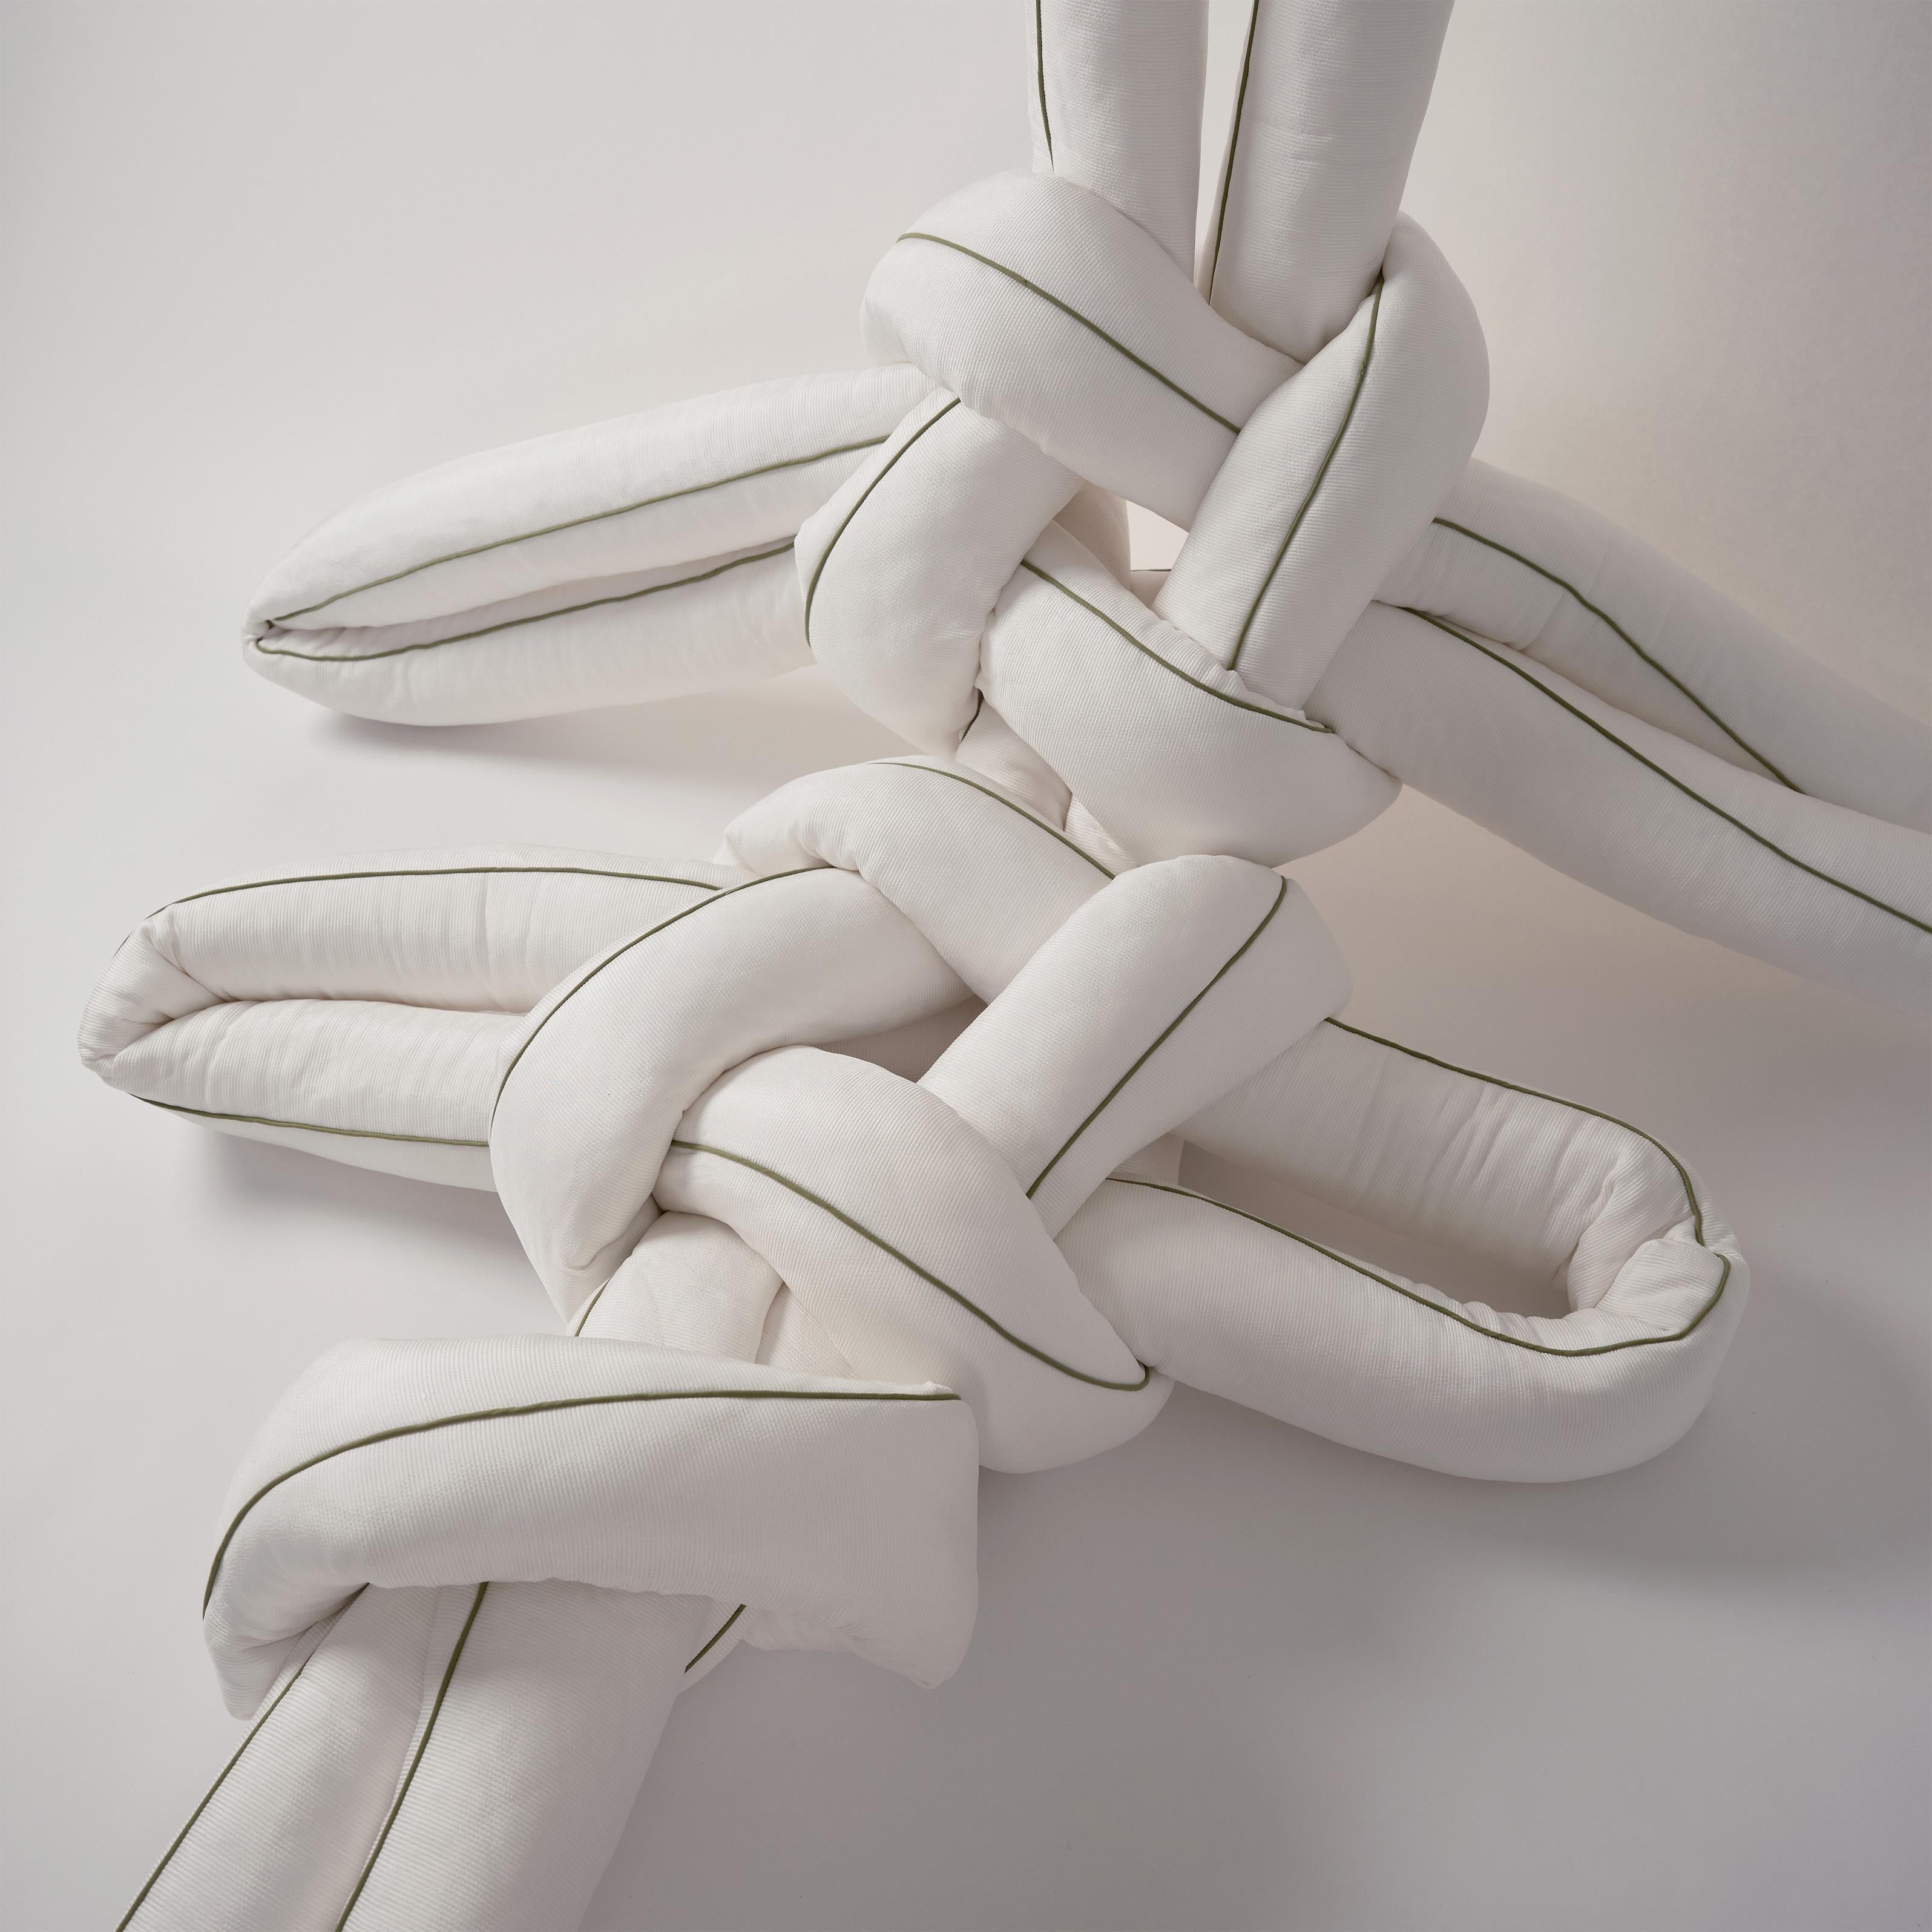 Maeduep. Dragonfly, 2022 by WKND Lab 
From the series Tying Wishes 
Technique: Korean Traditional knot
Material: Cotton, expandable polypropylene rayon, polyester filling
Size: 160.0 x 50.0 x 40.0 cm (Φ13.0) 
Color: White
(seat, cushion, wall